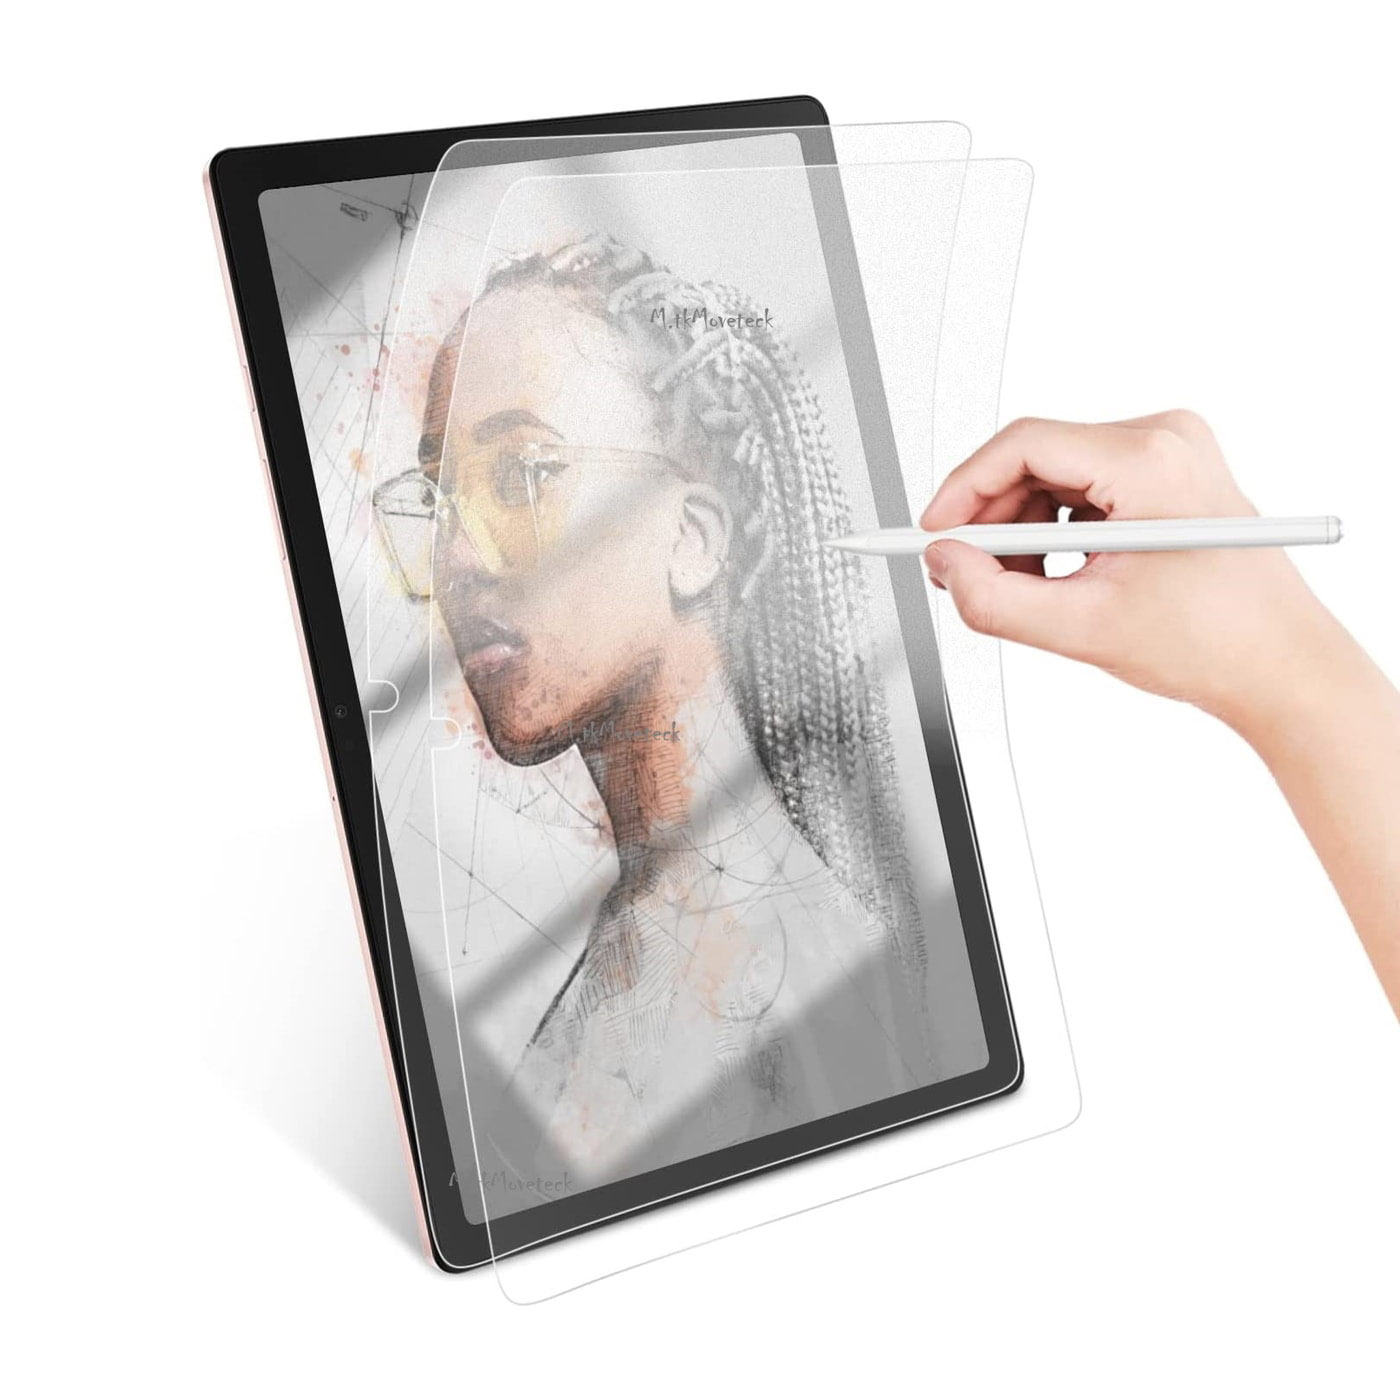 Paper-Like Screen Protector For Samsung Galaxy Tab A7 10.4inch 2020 Anti-Glare Matte PET Film For Write and Draw Like on Paper